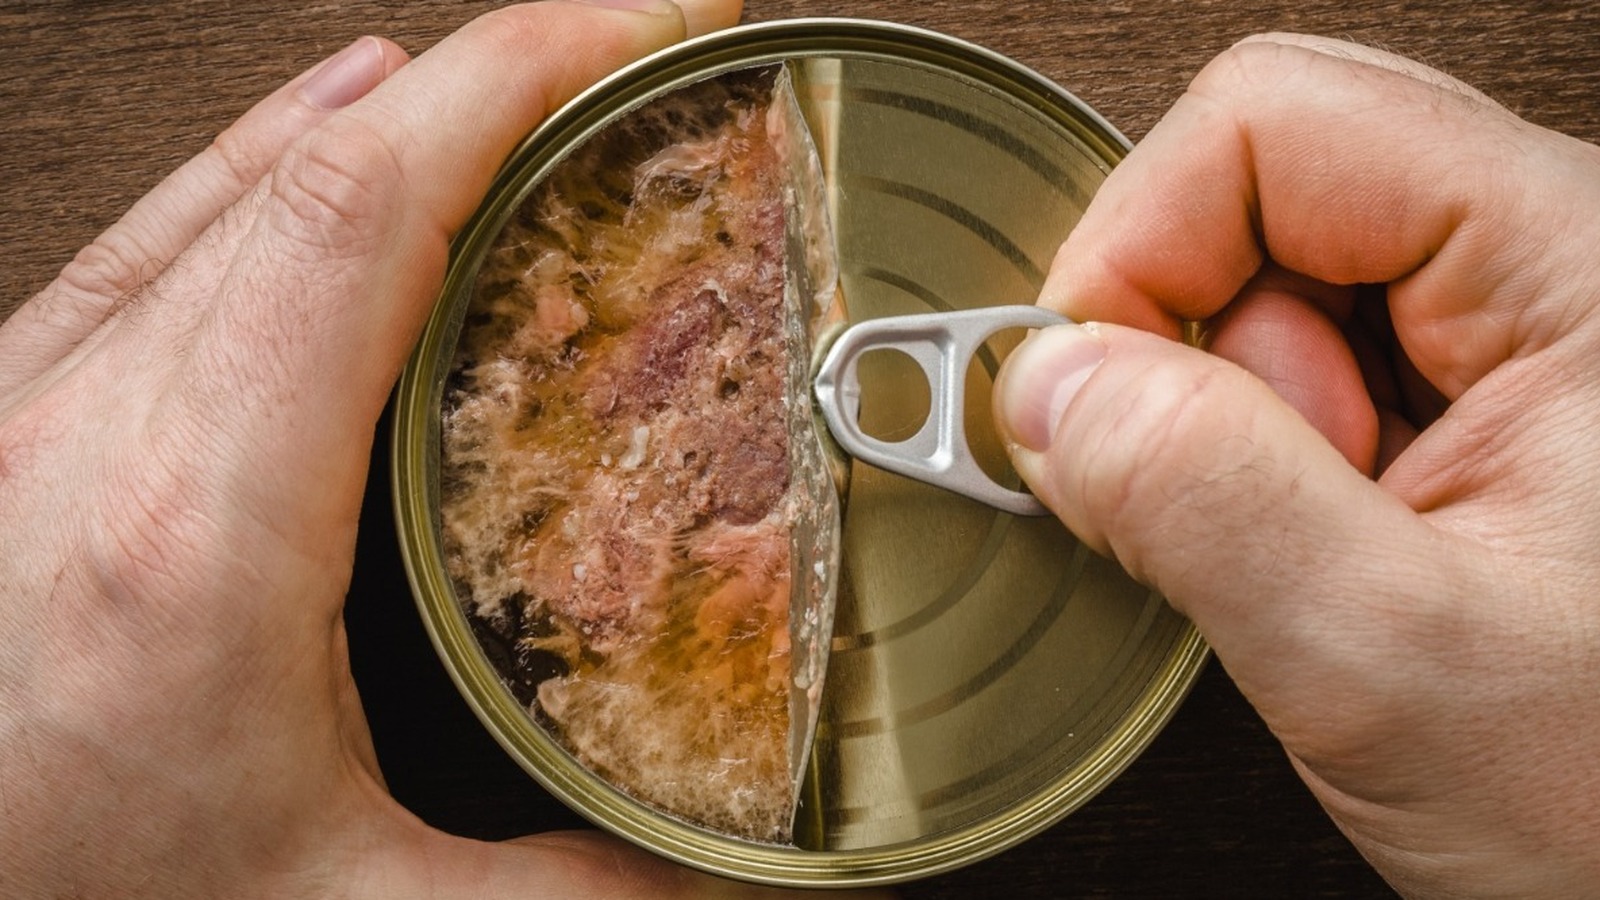 https://www.mashed.com/img/gallery/popular-canned-meats-ranked-from-worst-to-best/l-intro-1643216458.jpg